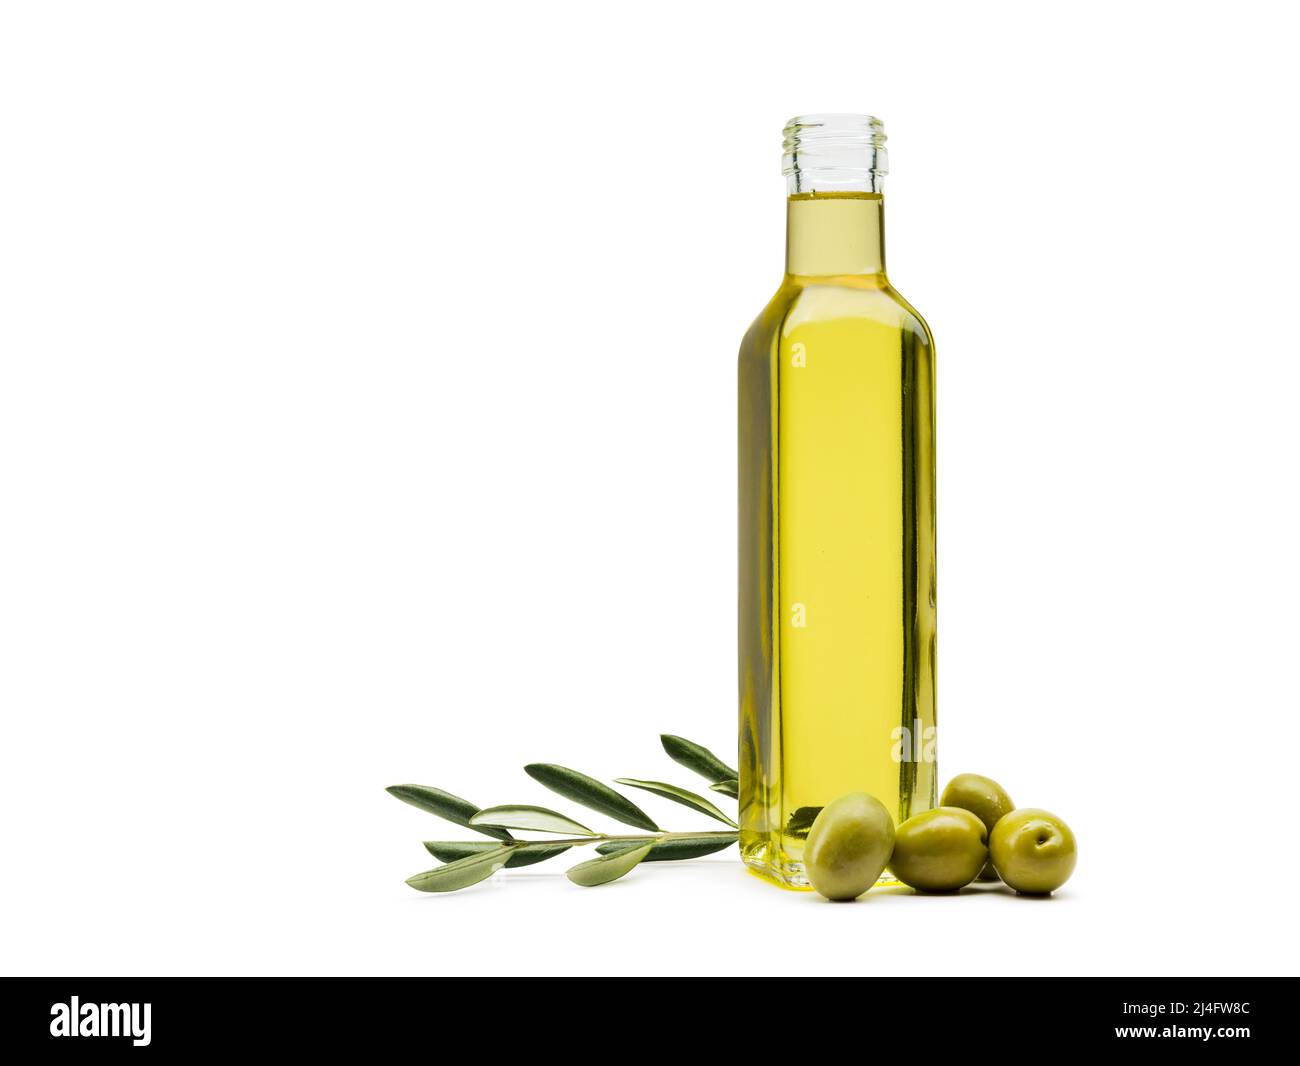 olive oil bottle with green olives on white background Stock Photo